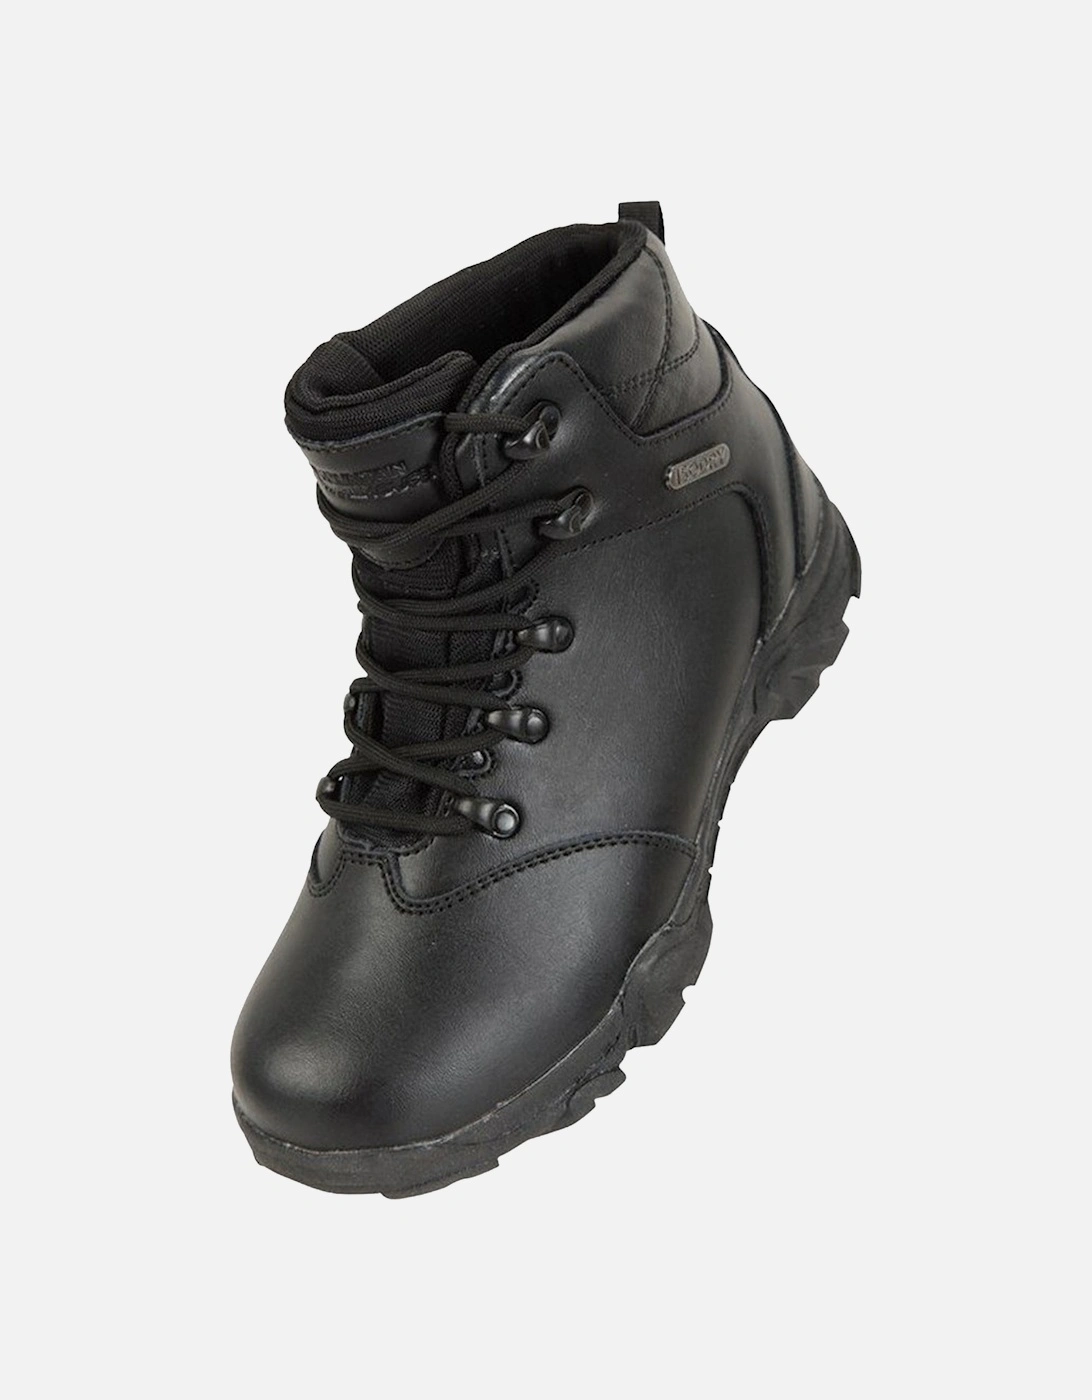 Childrens/Kids Canyon Waterproof Suede Walking Boots